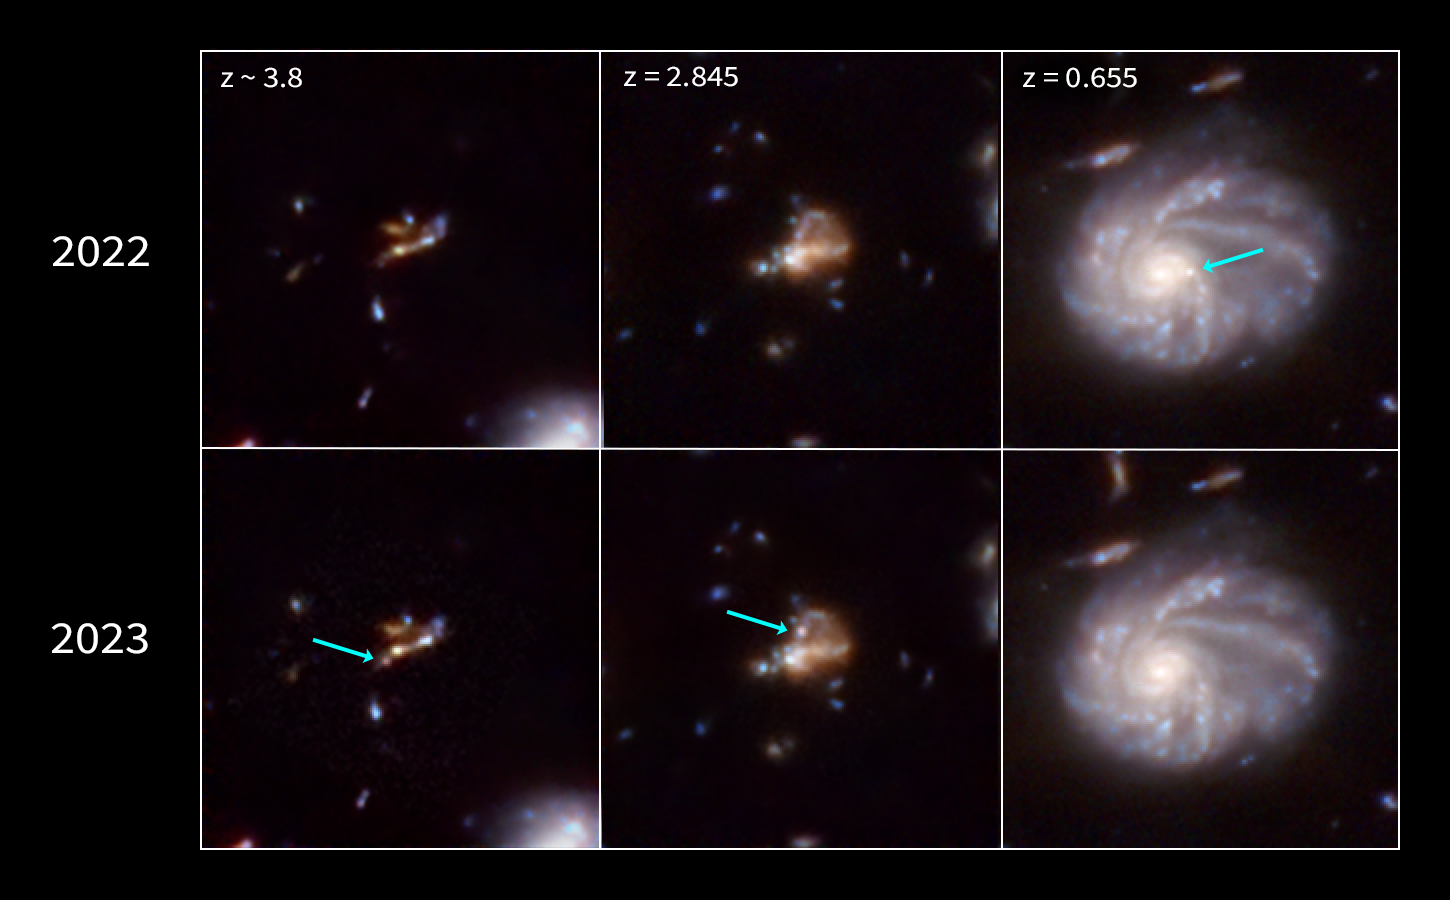 Six space telescope images show close-ups of two different observations (rows) of three different galaxies (columns). Of note arrows point to the bright blobs that are visible in one observation of the galaxy, but not the other.